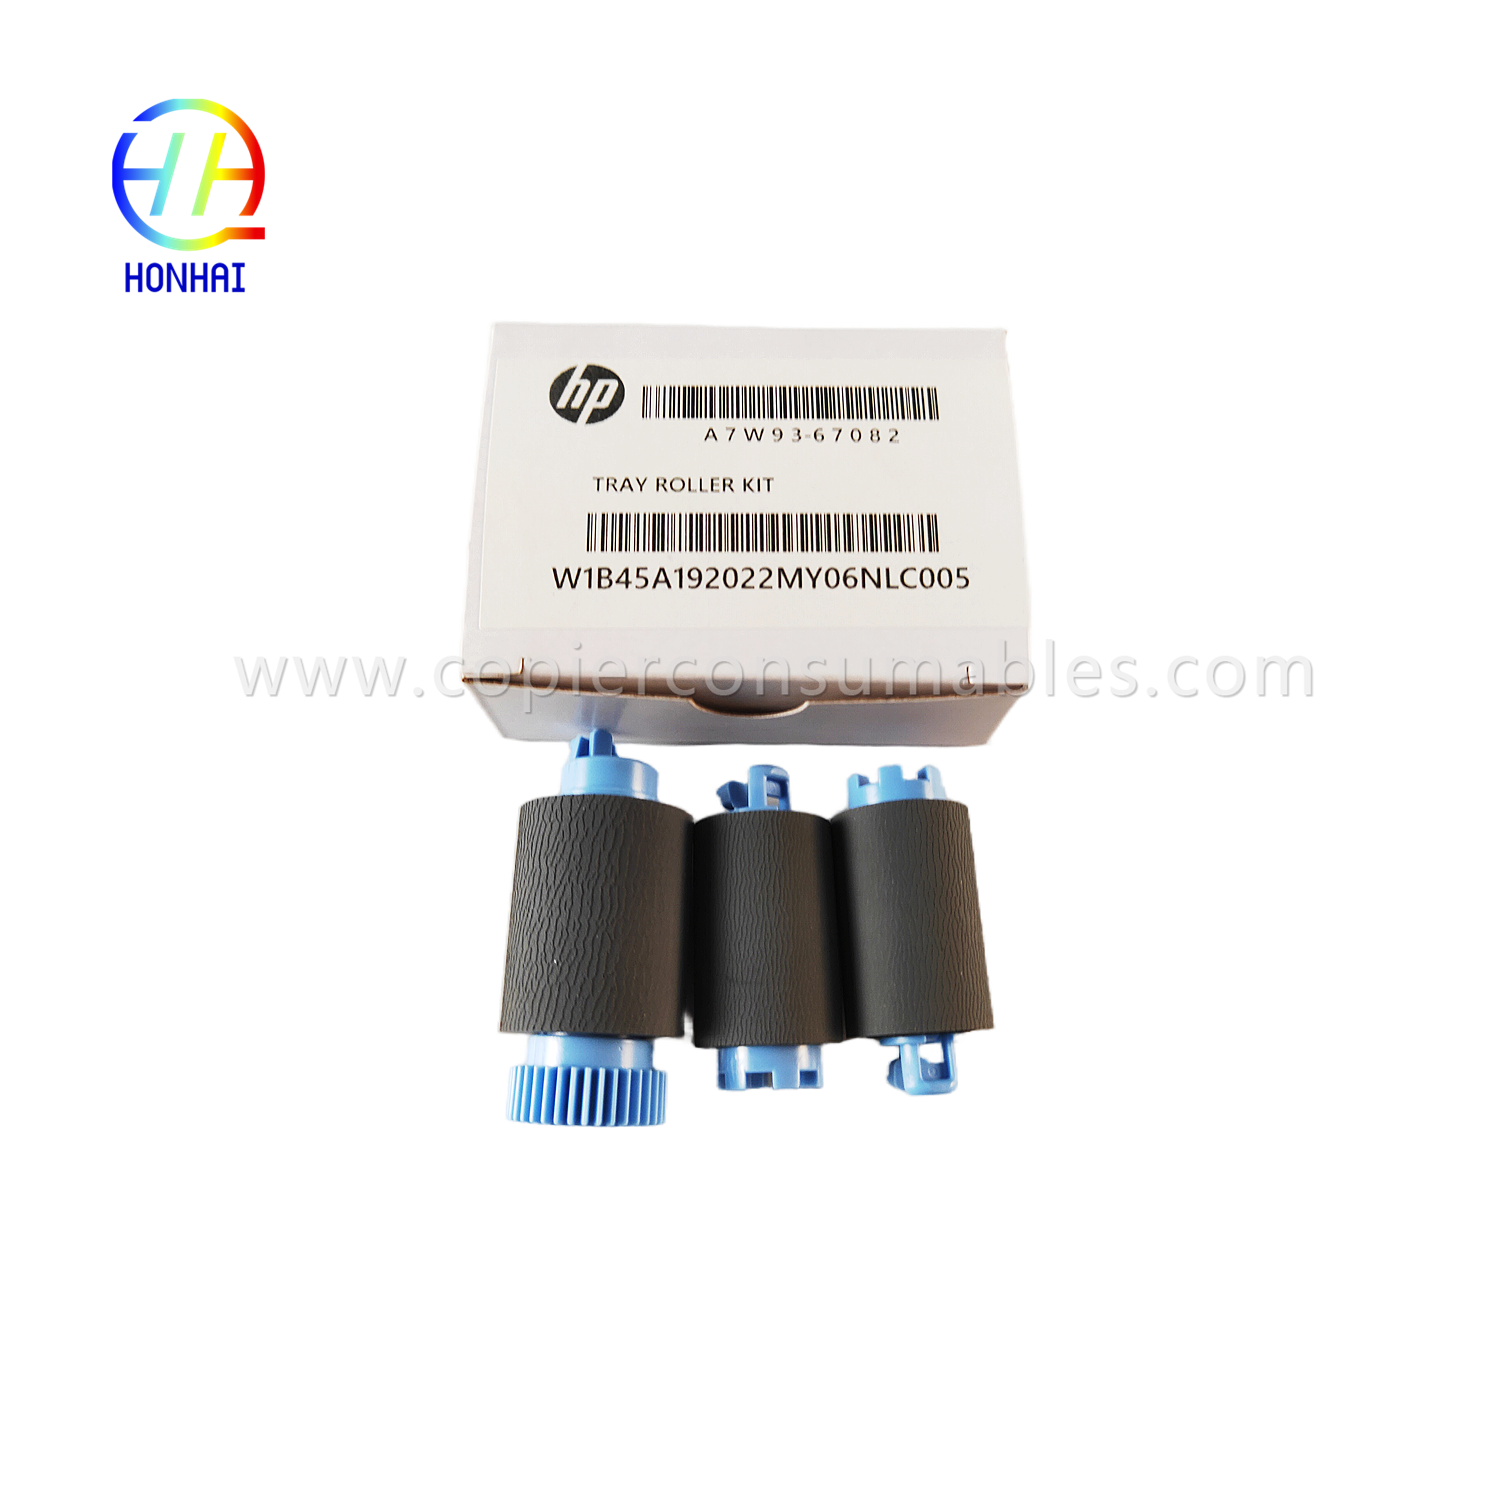 https://c585.goodao.net/tray-2-5-pickup-feed-separation-roller-set-for-hp-a7w93-67082-mfp-785f-780dn-e77650z-e77660z-e77650dn-e77660dn-p77740dn-p77750z-p77760z-p75050dn-p75050dw-product/